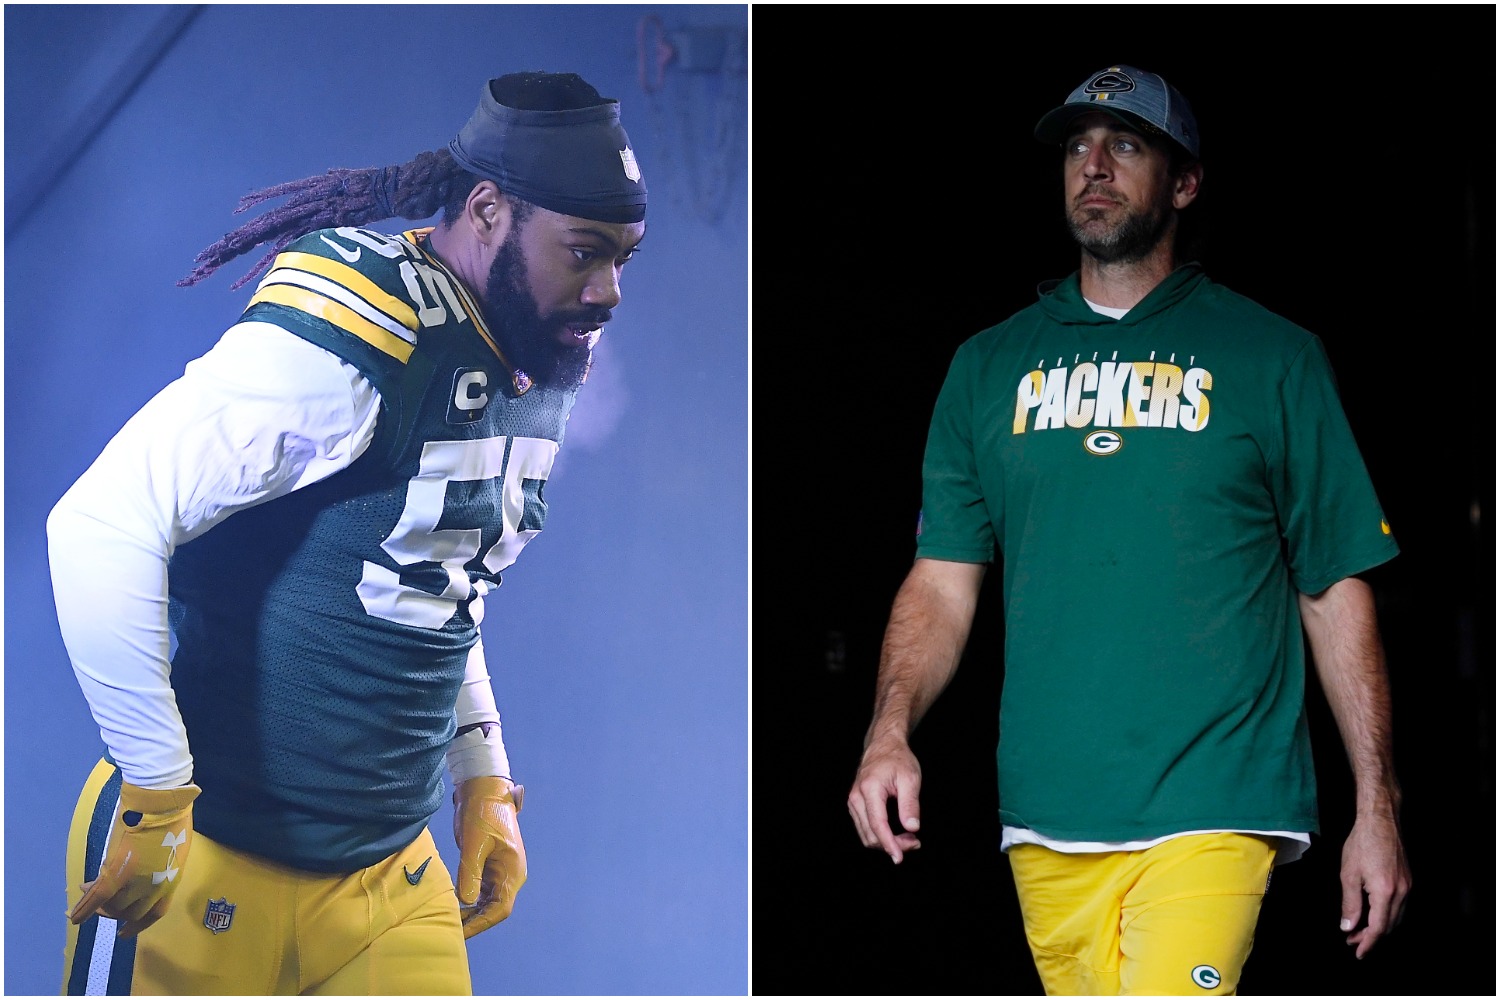 Green Bay Packers linebacker Za'Darius Smith exits the tunnel as Aaron Rodgers heads onto the field before a preseason game.